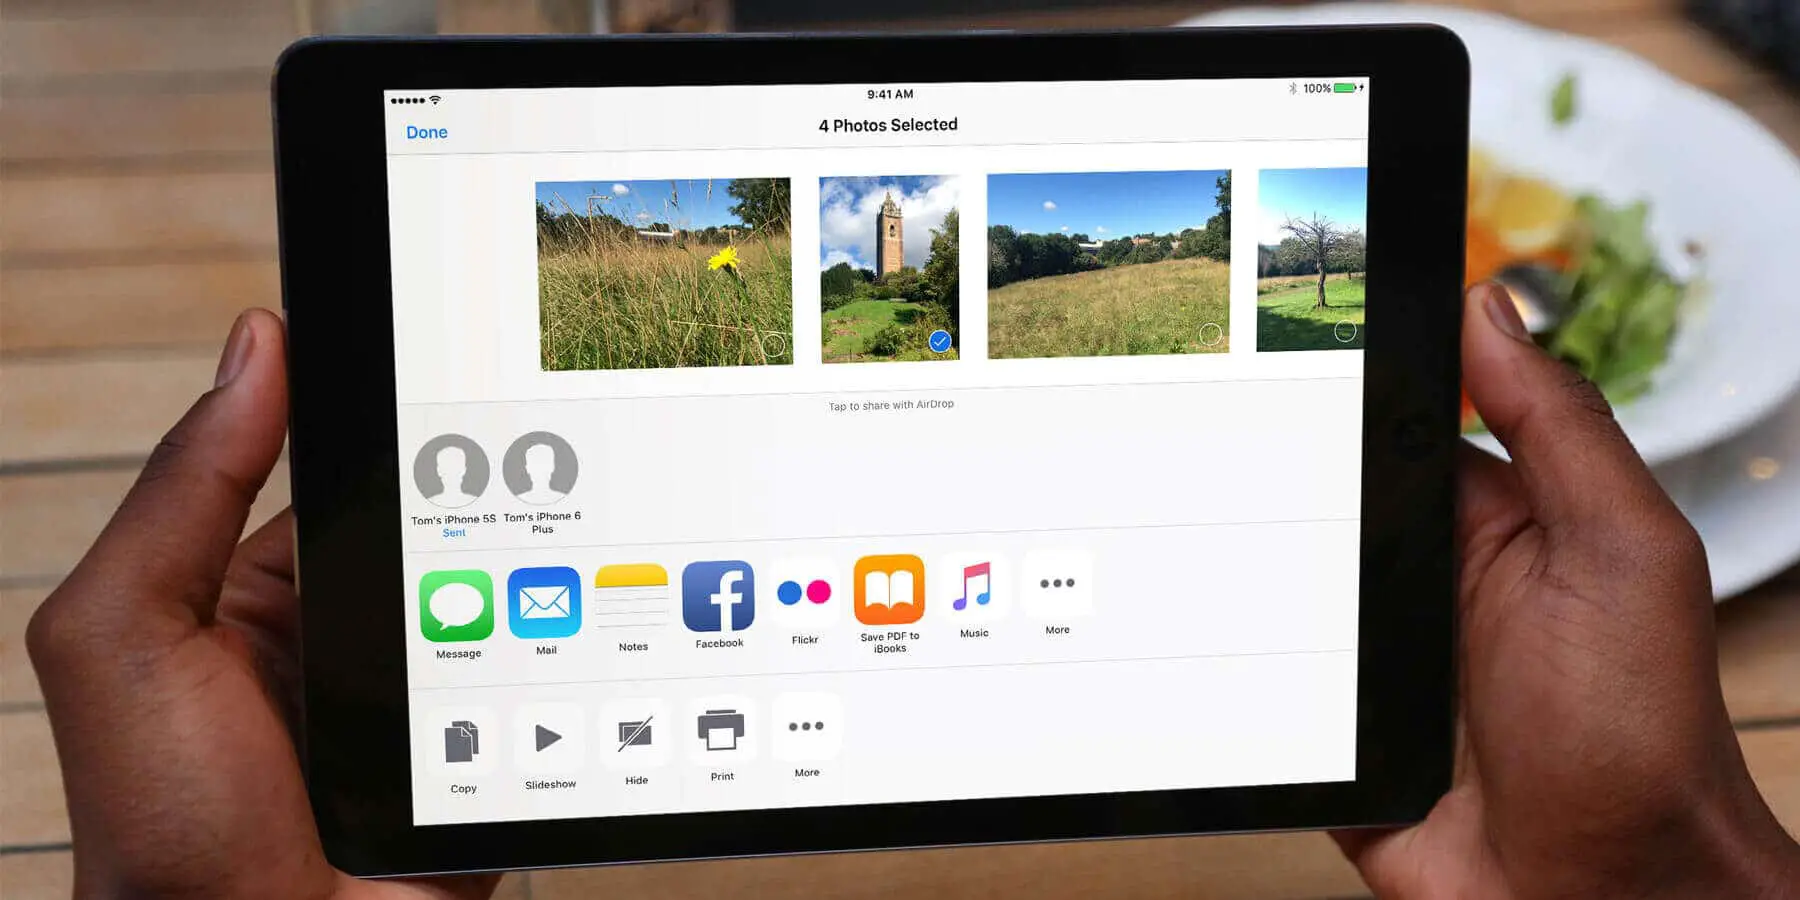 iOS 9: share files wirelessly on iPad using AirDrop - TapSmart